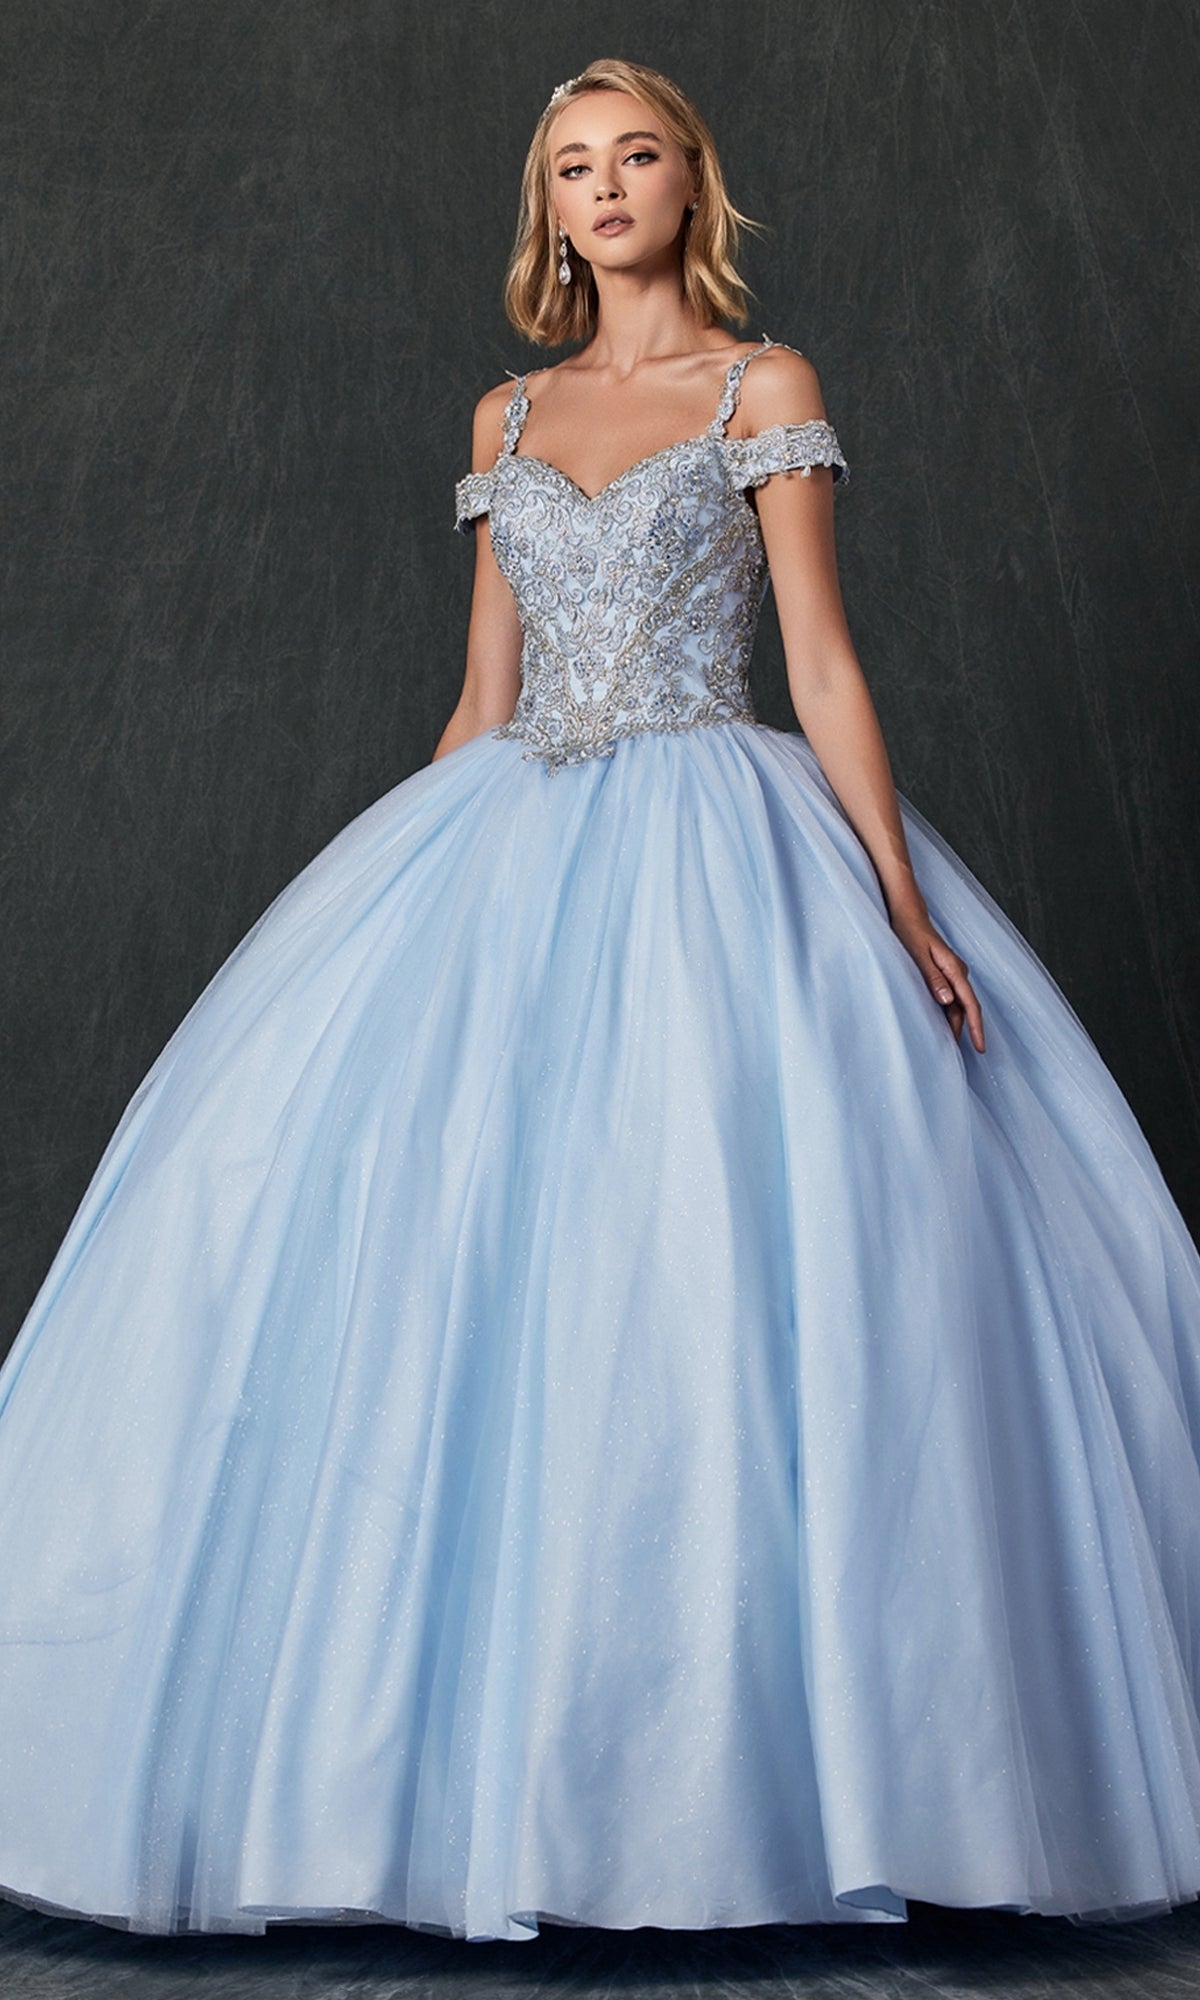 Cold-Shoulder Ball Gown Quinceanera Dress - PromGirl